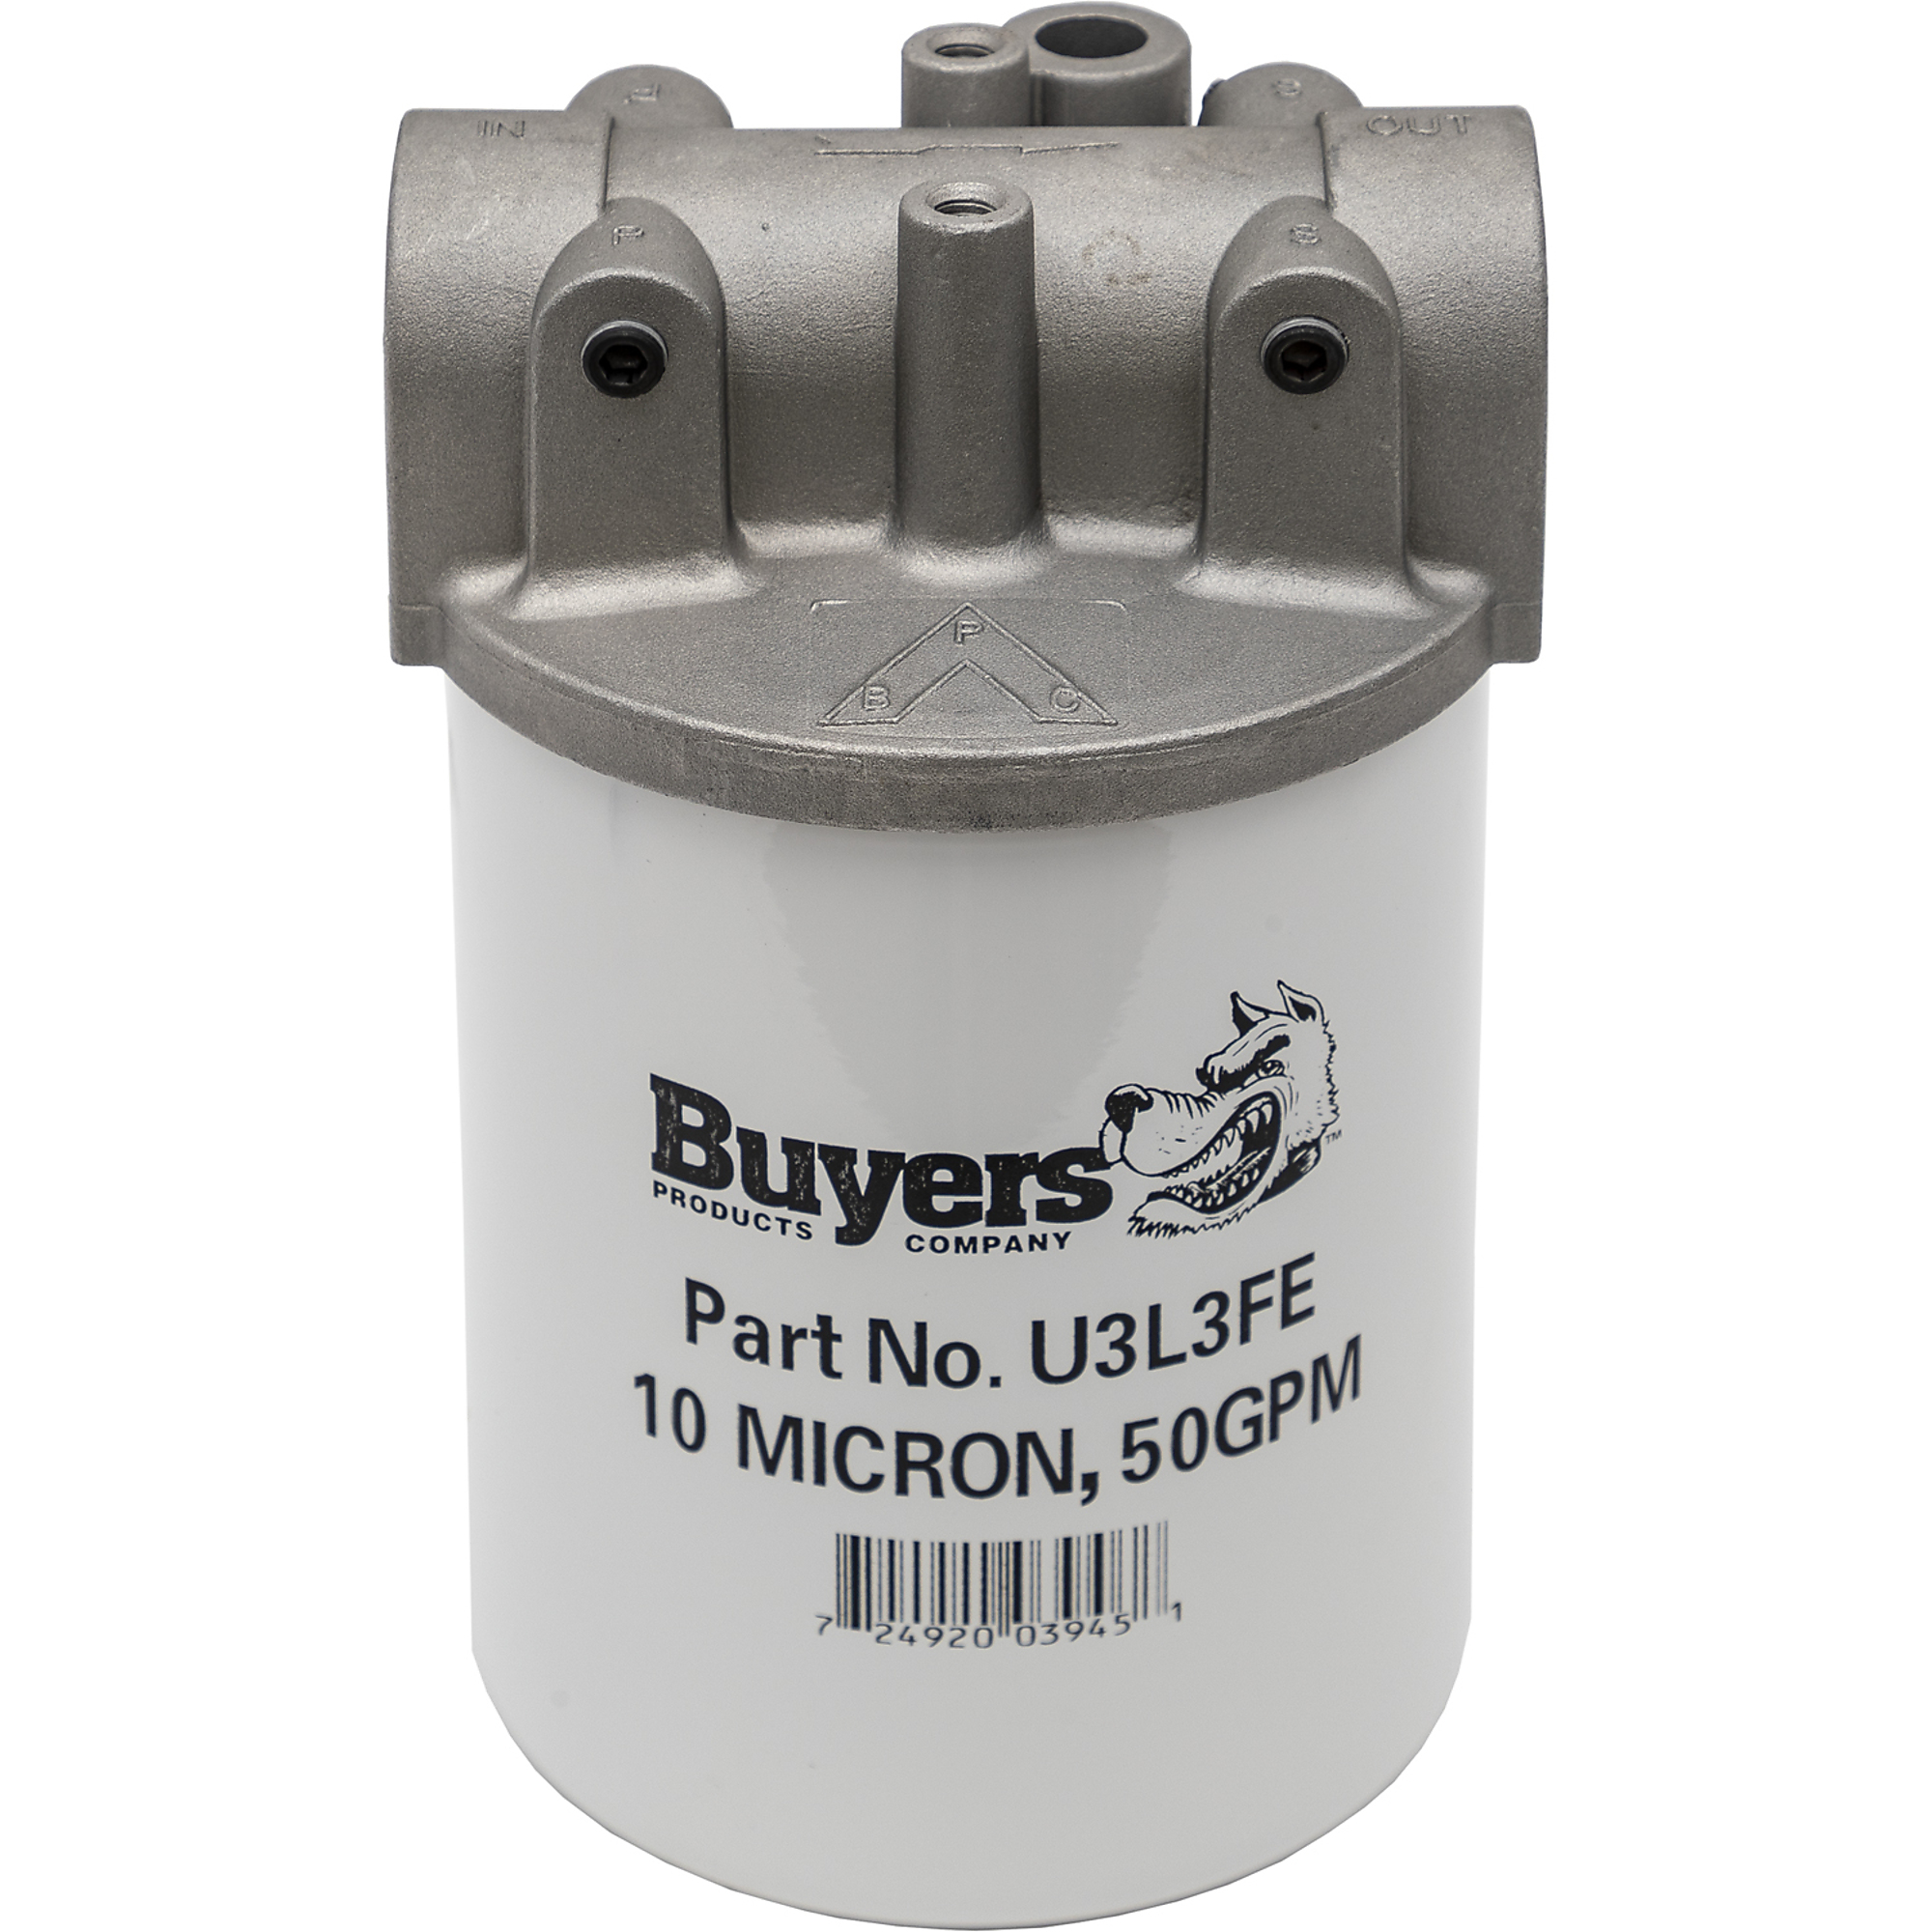 Buyers Products, 50 GPM Return Line Filter Assembly, Model HFA21025